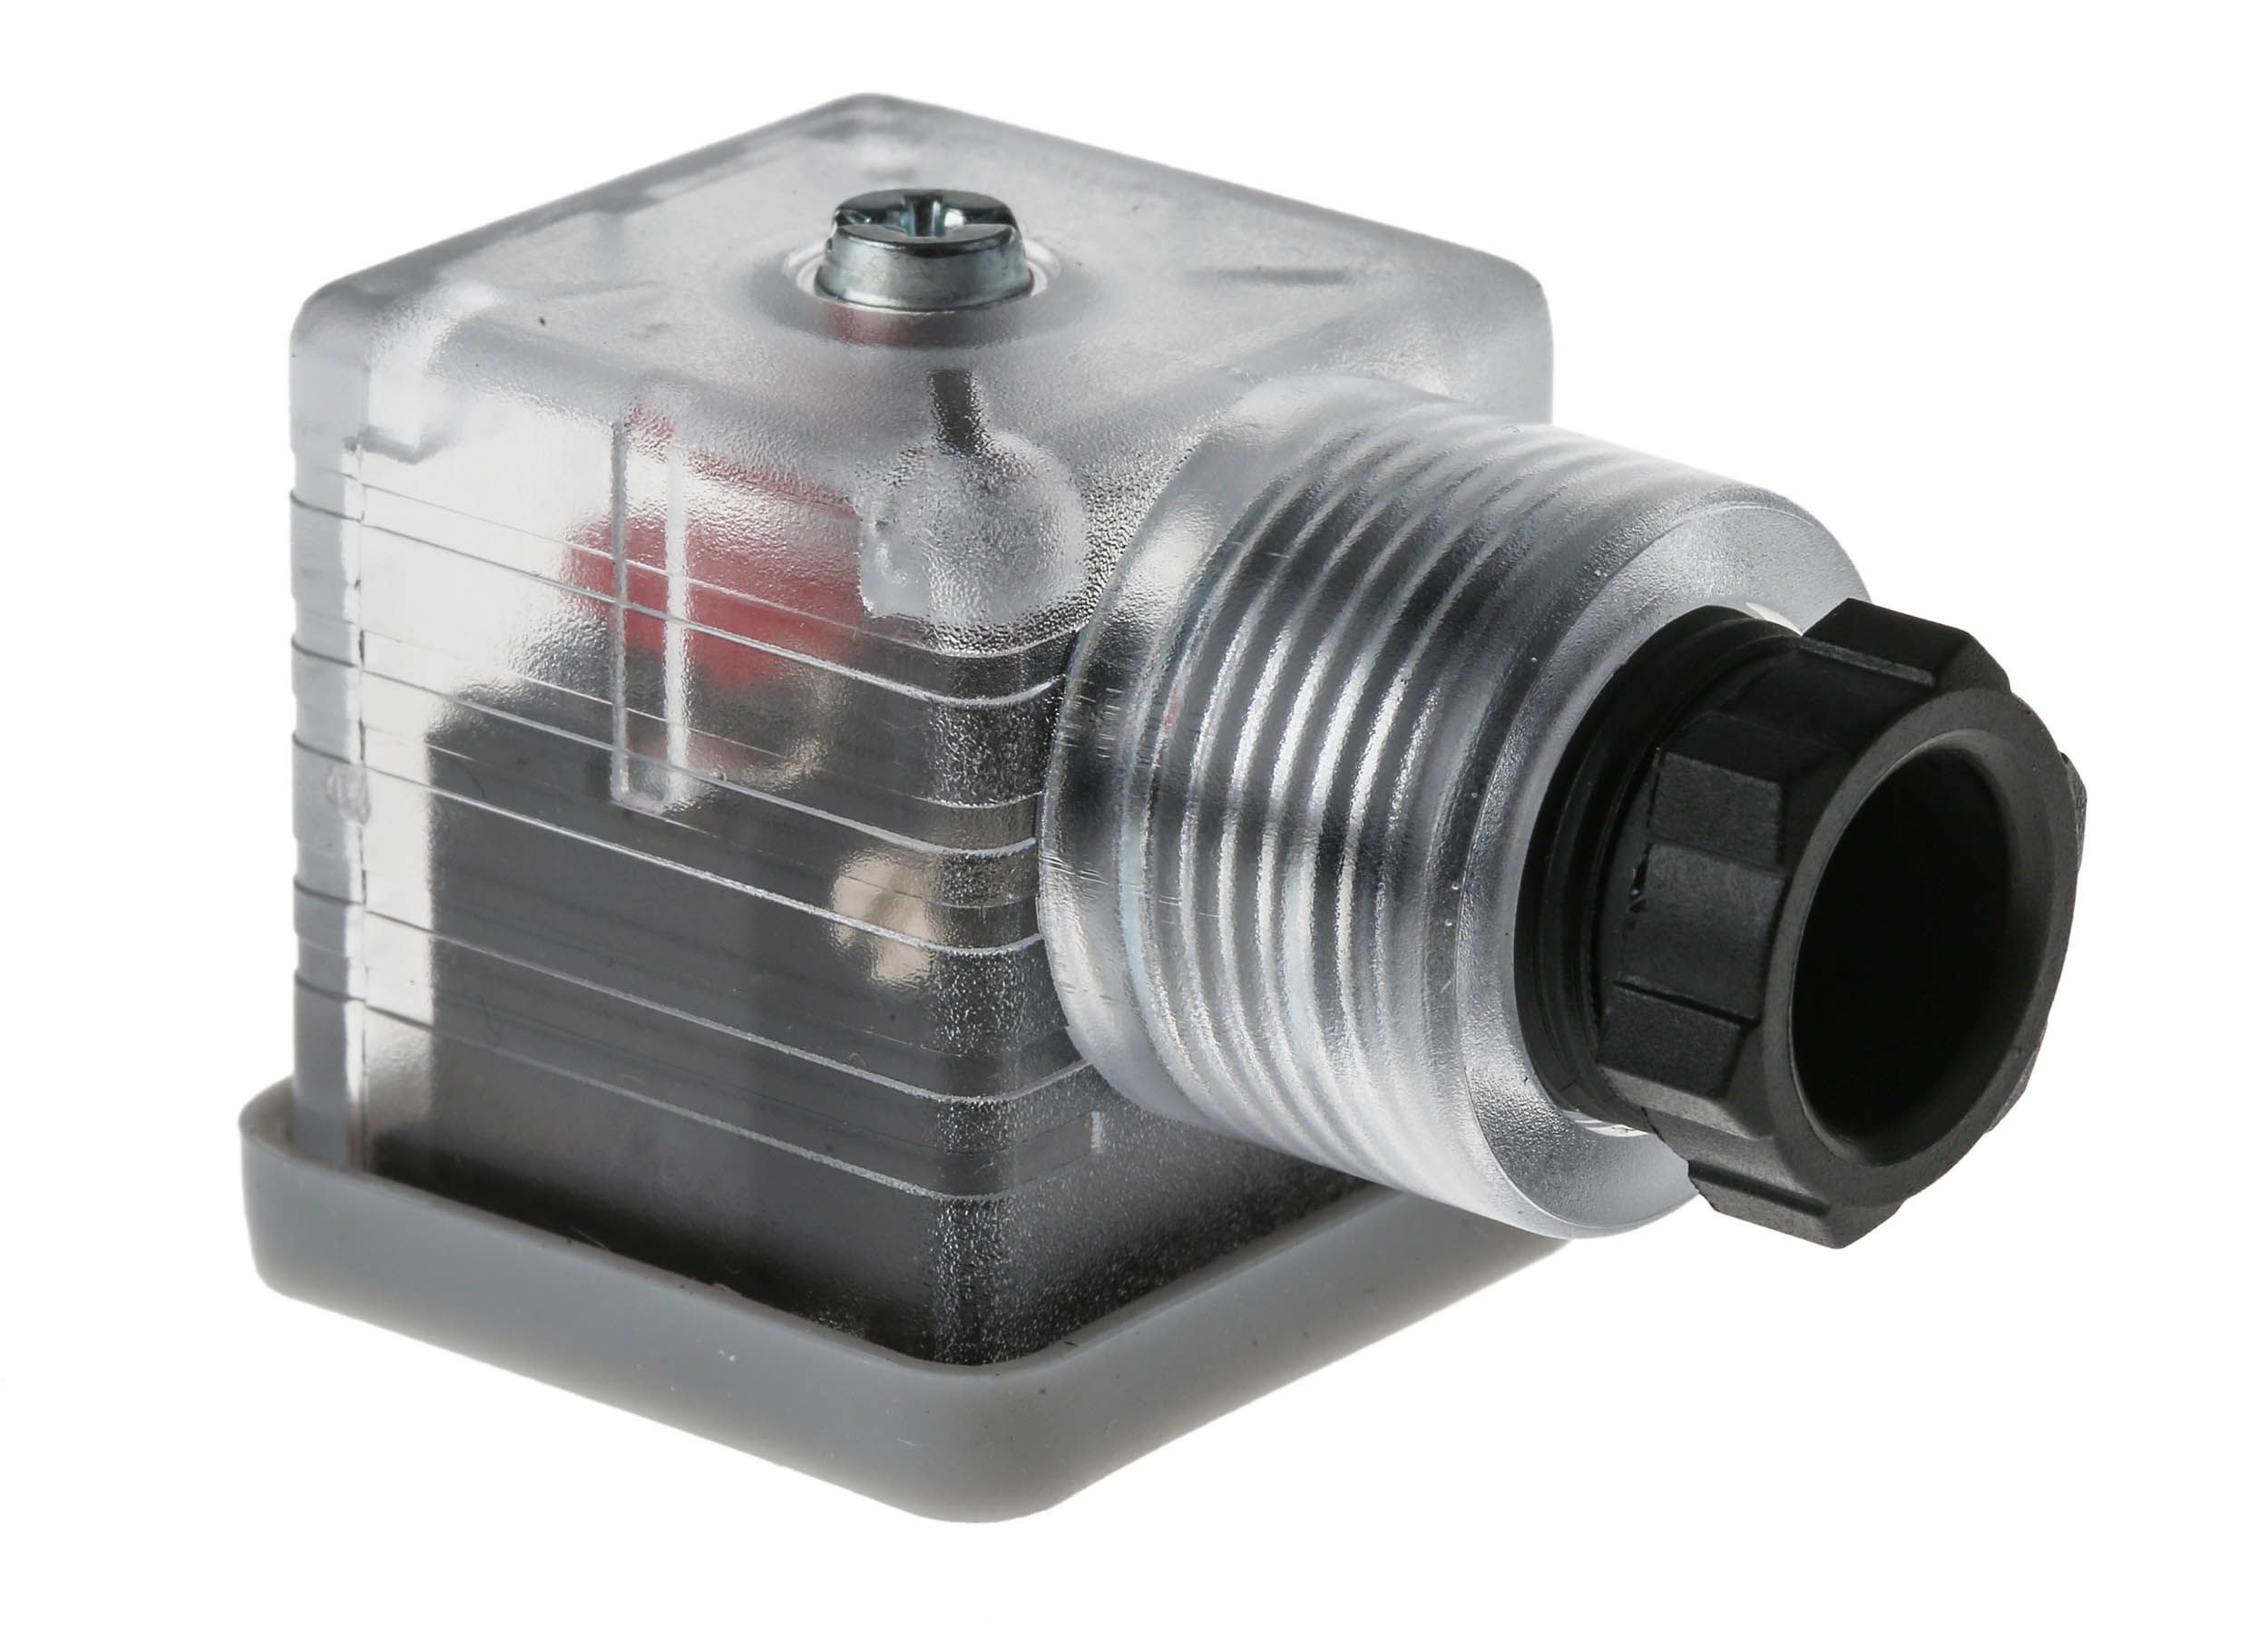 RS PRO 3P+E DIN 43650 A, Female Solenoid Valve Connector,  with Indicator Light, 24 V dc Voltage